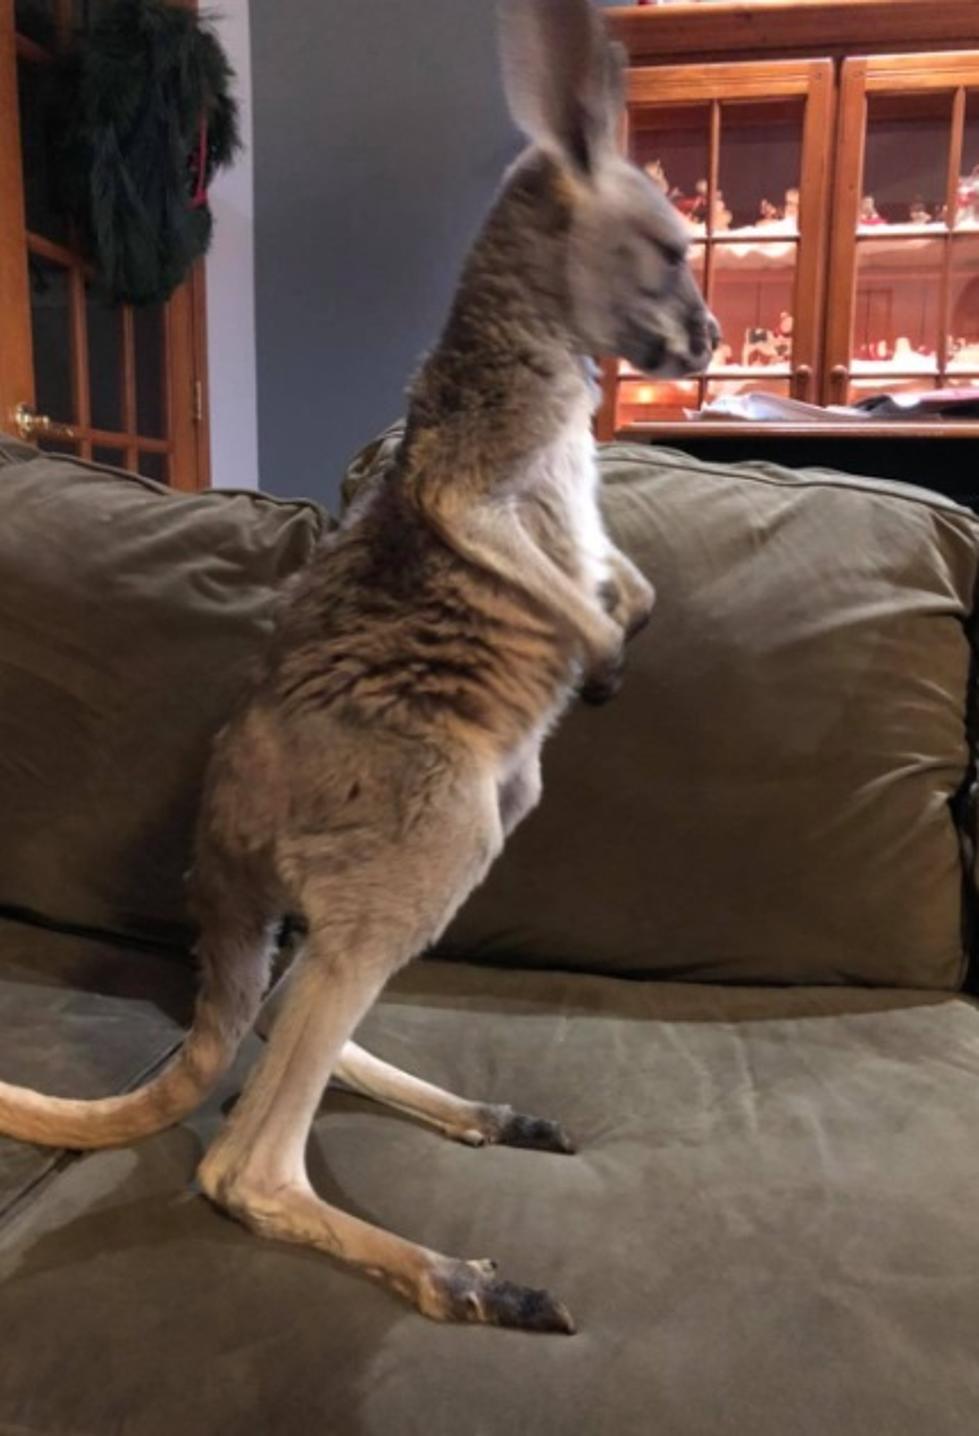 Buffalo, You Can Have This Kangaroo Come To Your House